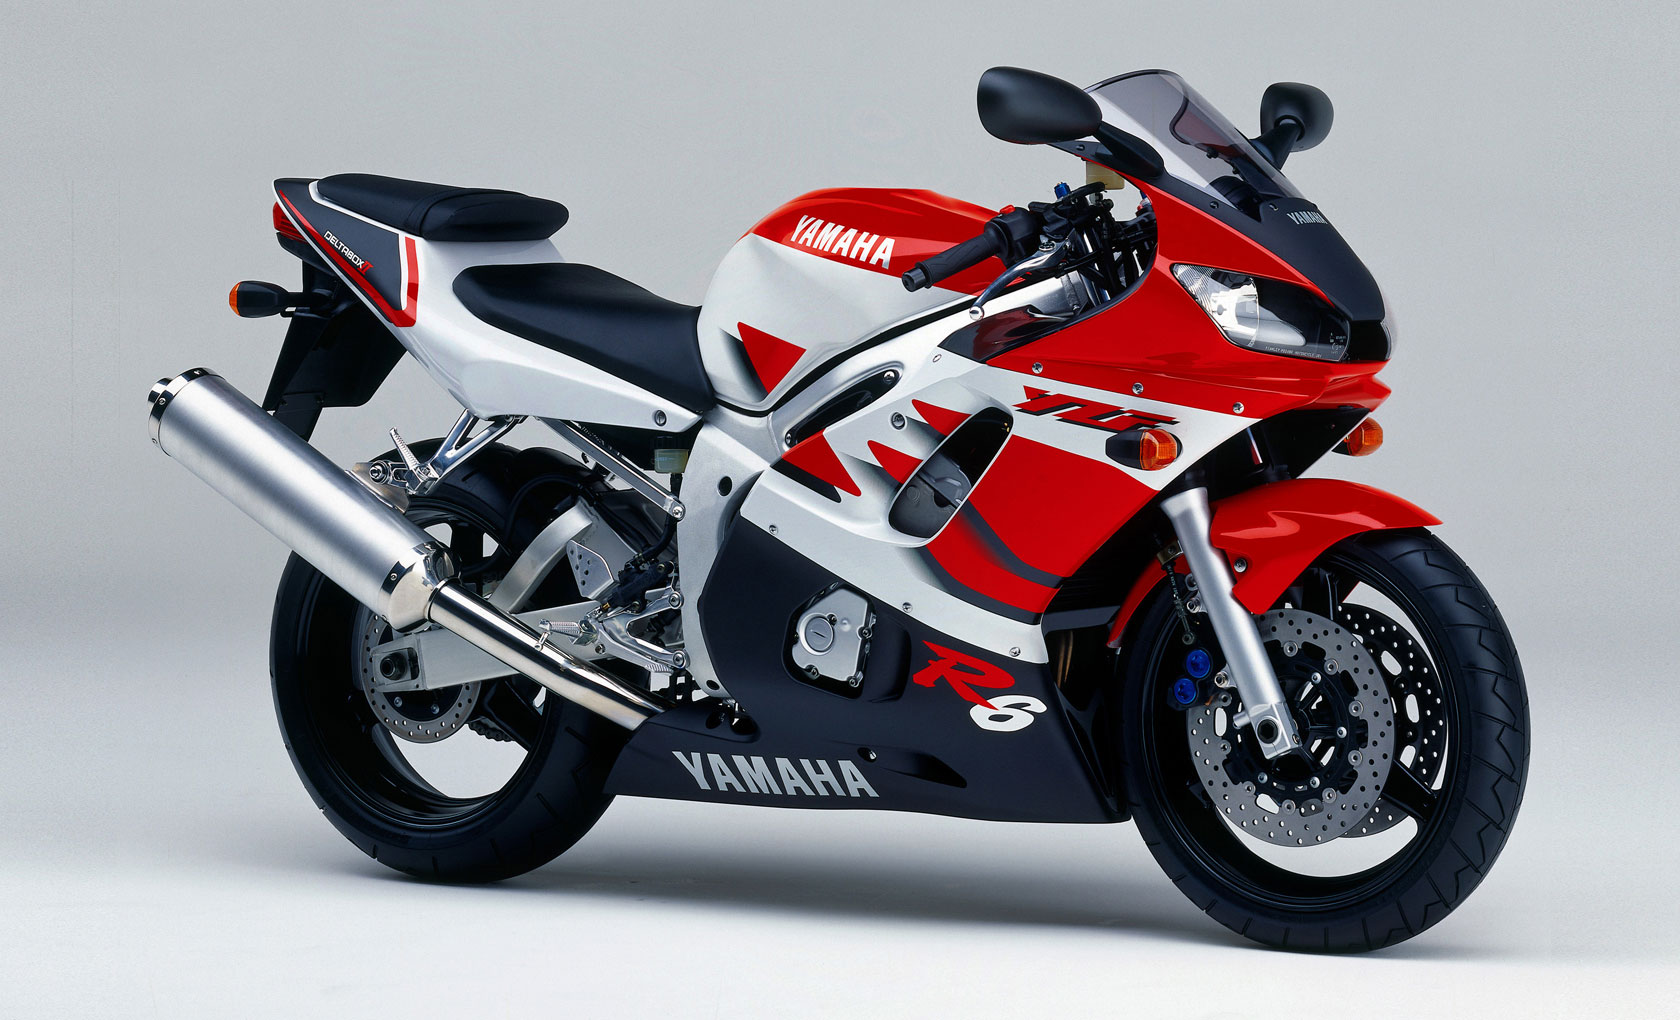 Page 1 - Yamaha R6/YZF-R6 series model history timelines